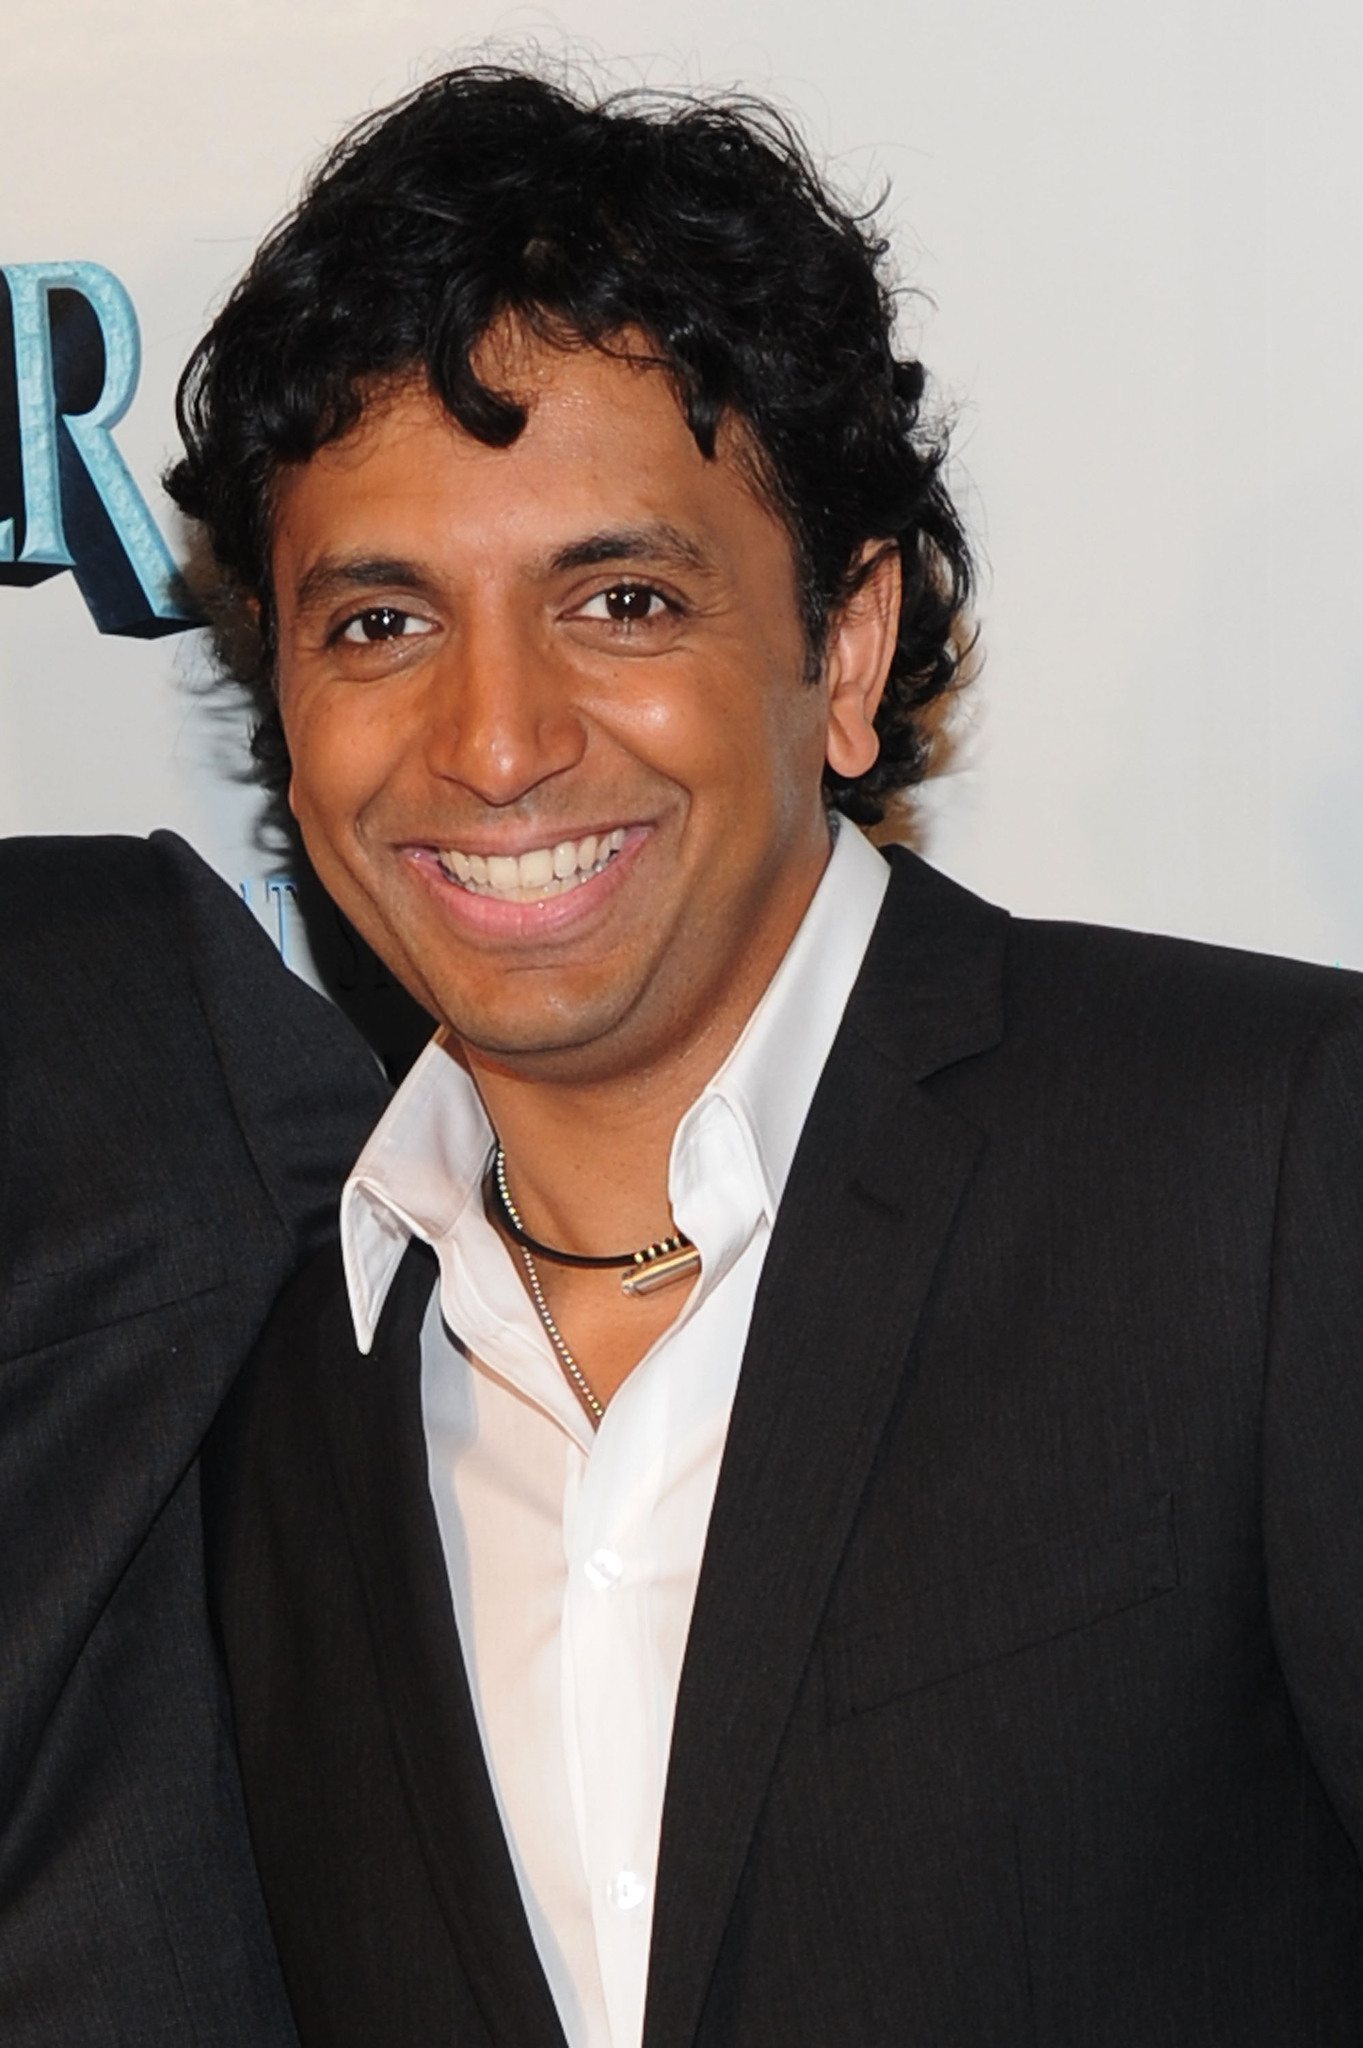 M. Night Shyamalan at event of The Last Airbender (2010)